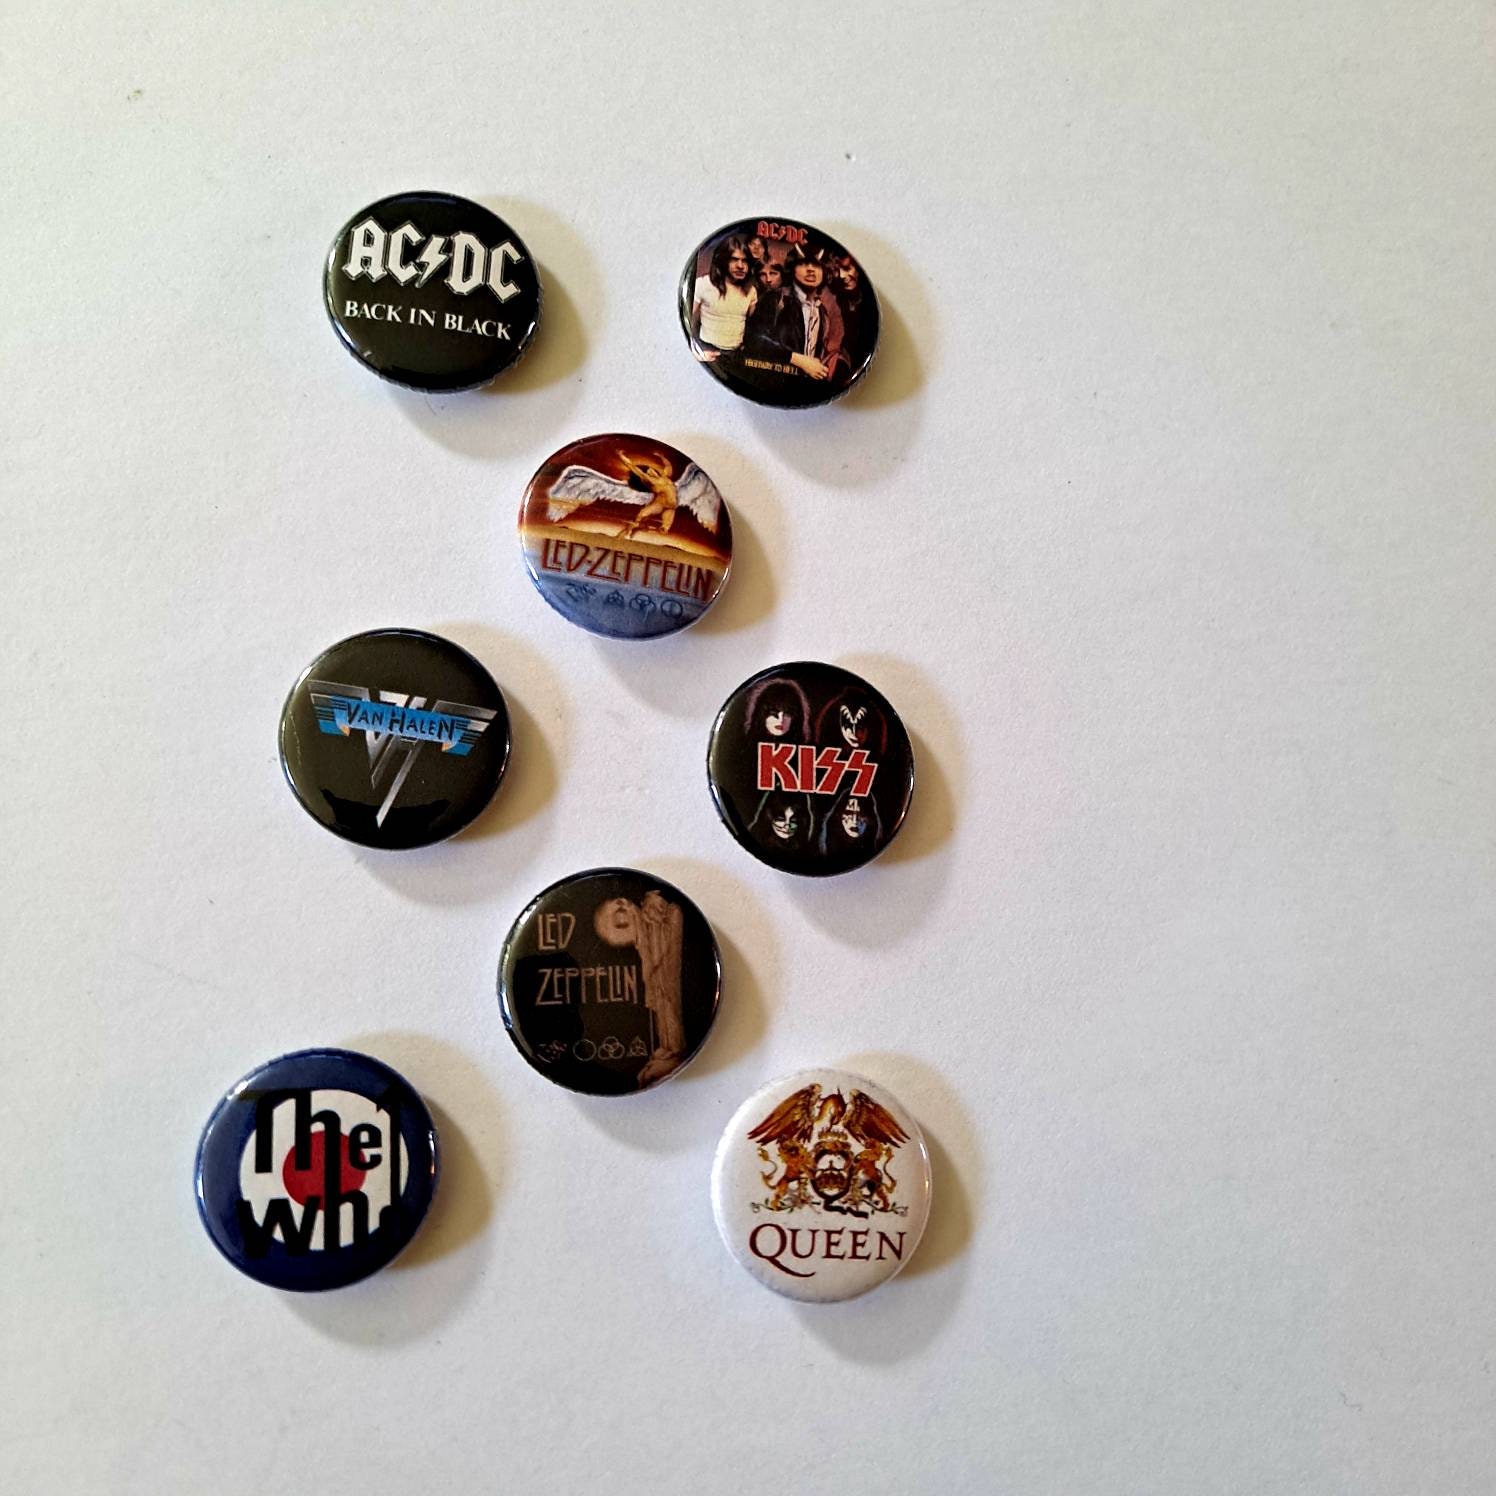 GTOTd Rock and Roll Punk Pins(18 Pack,1.5 inch)Music Band Button Badge Rock Merch Party for Bag Backpack Jackets Accessories Supplies DIY Crafts